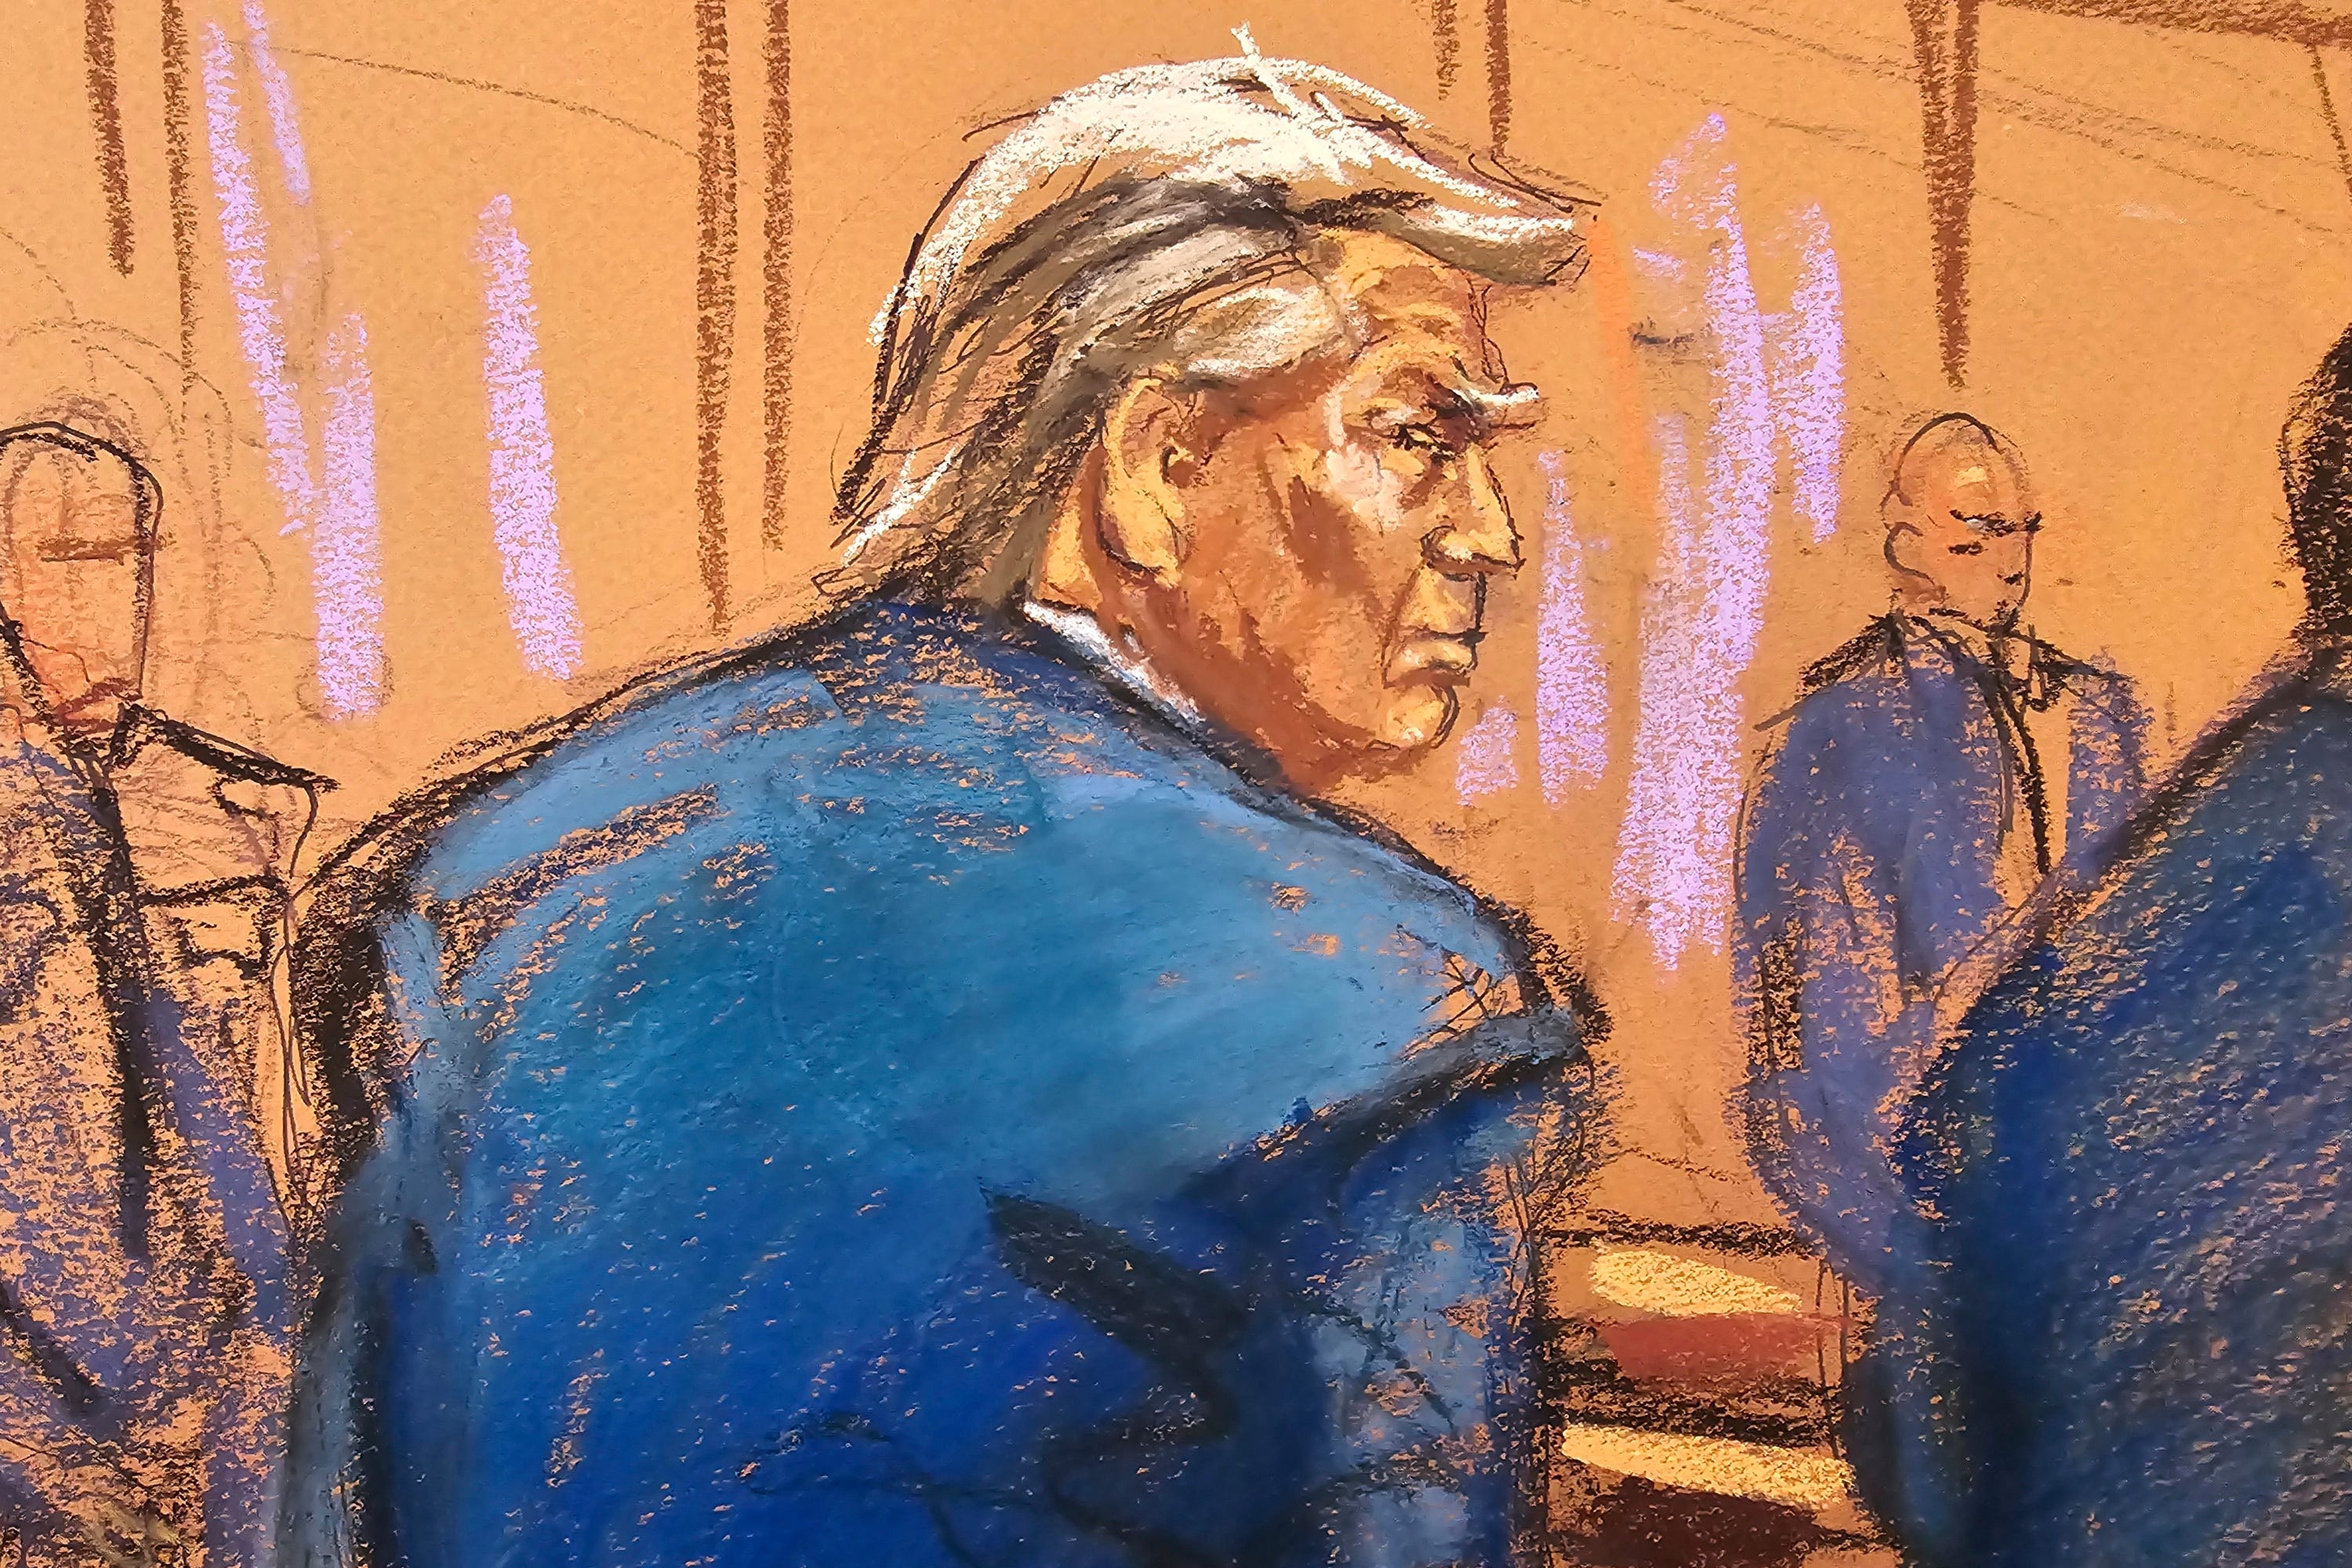 microsoft, trump trial sketch artists catch the former president's many courtroom moods: sleepy, grumpy, and — less often — happy